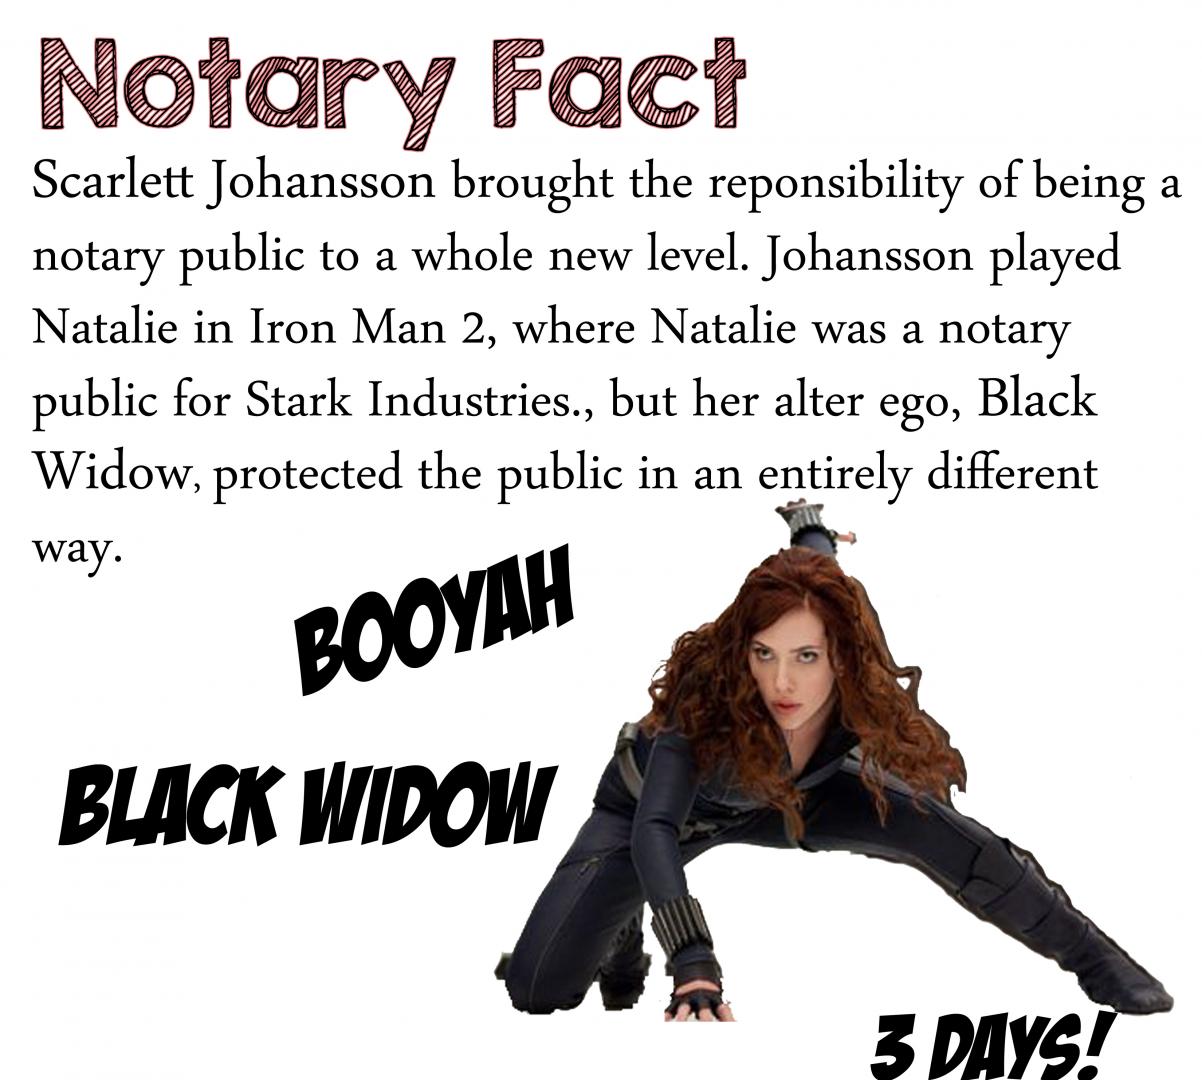 day-3-scarlett-johansson-and-black-widow-as-notary-public